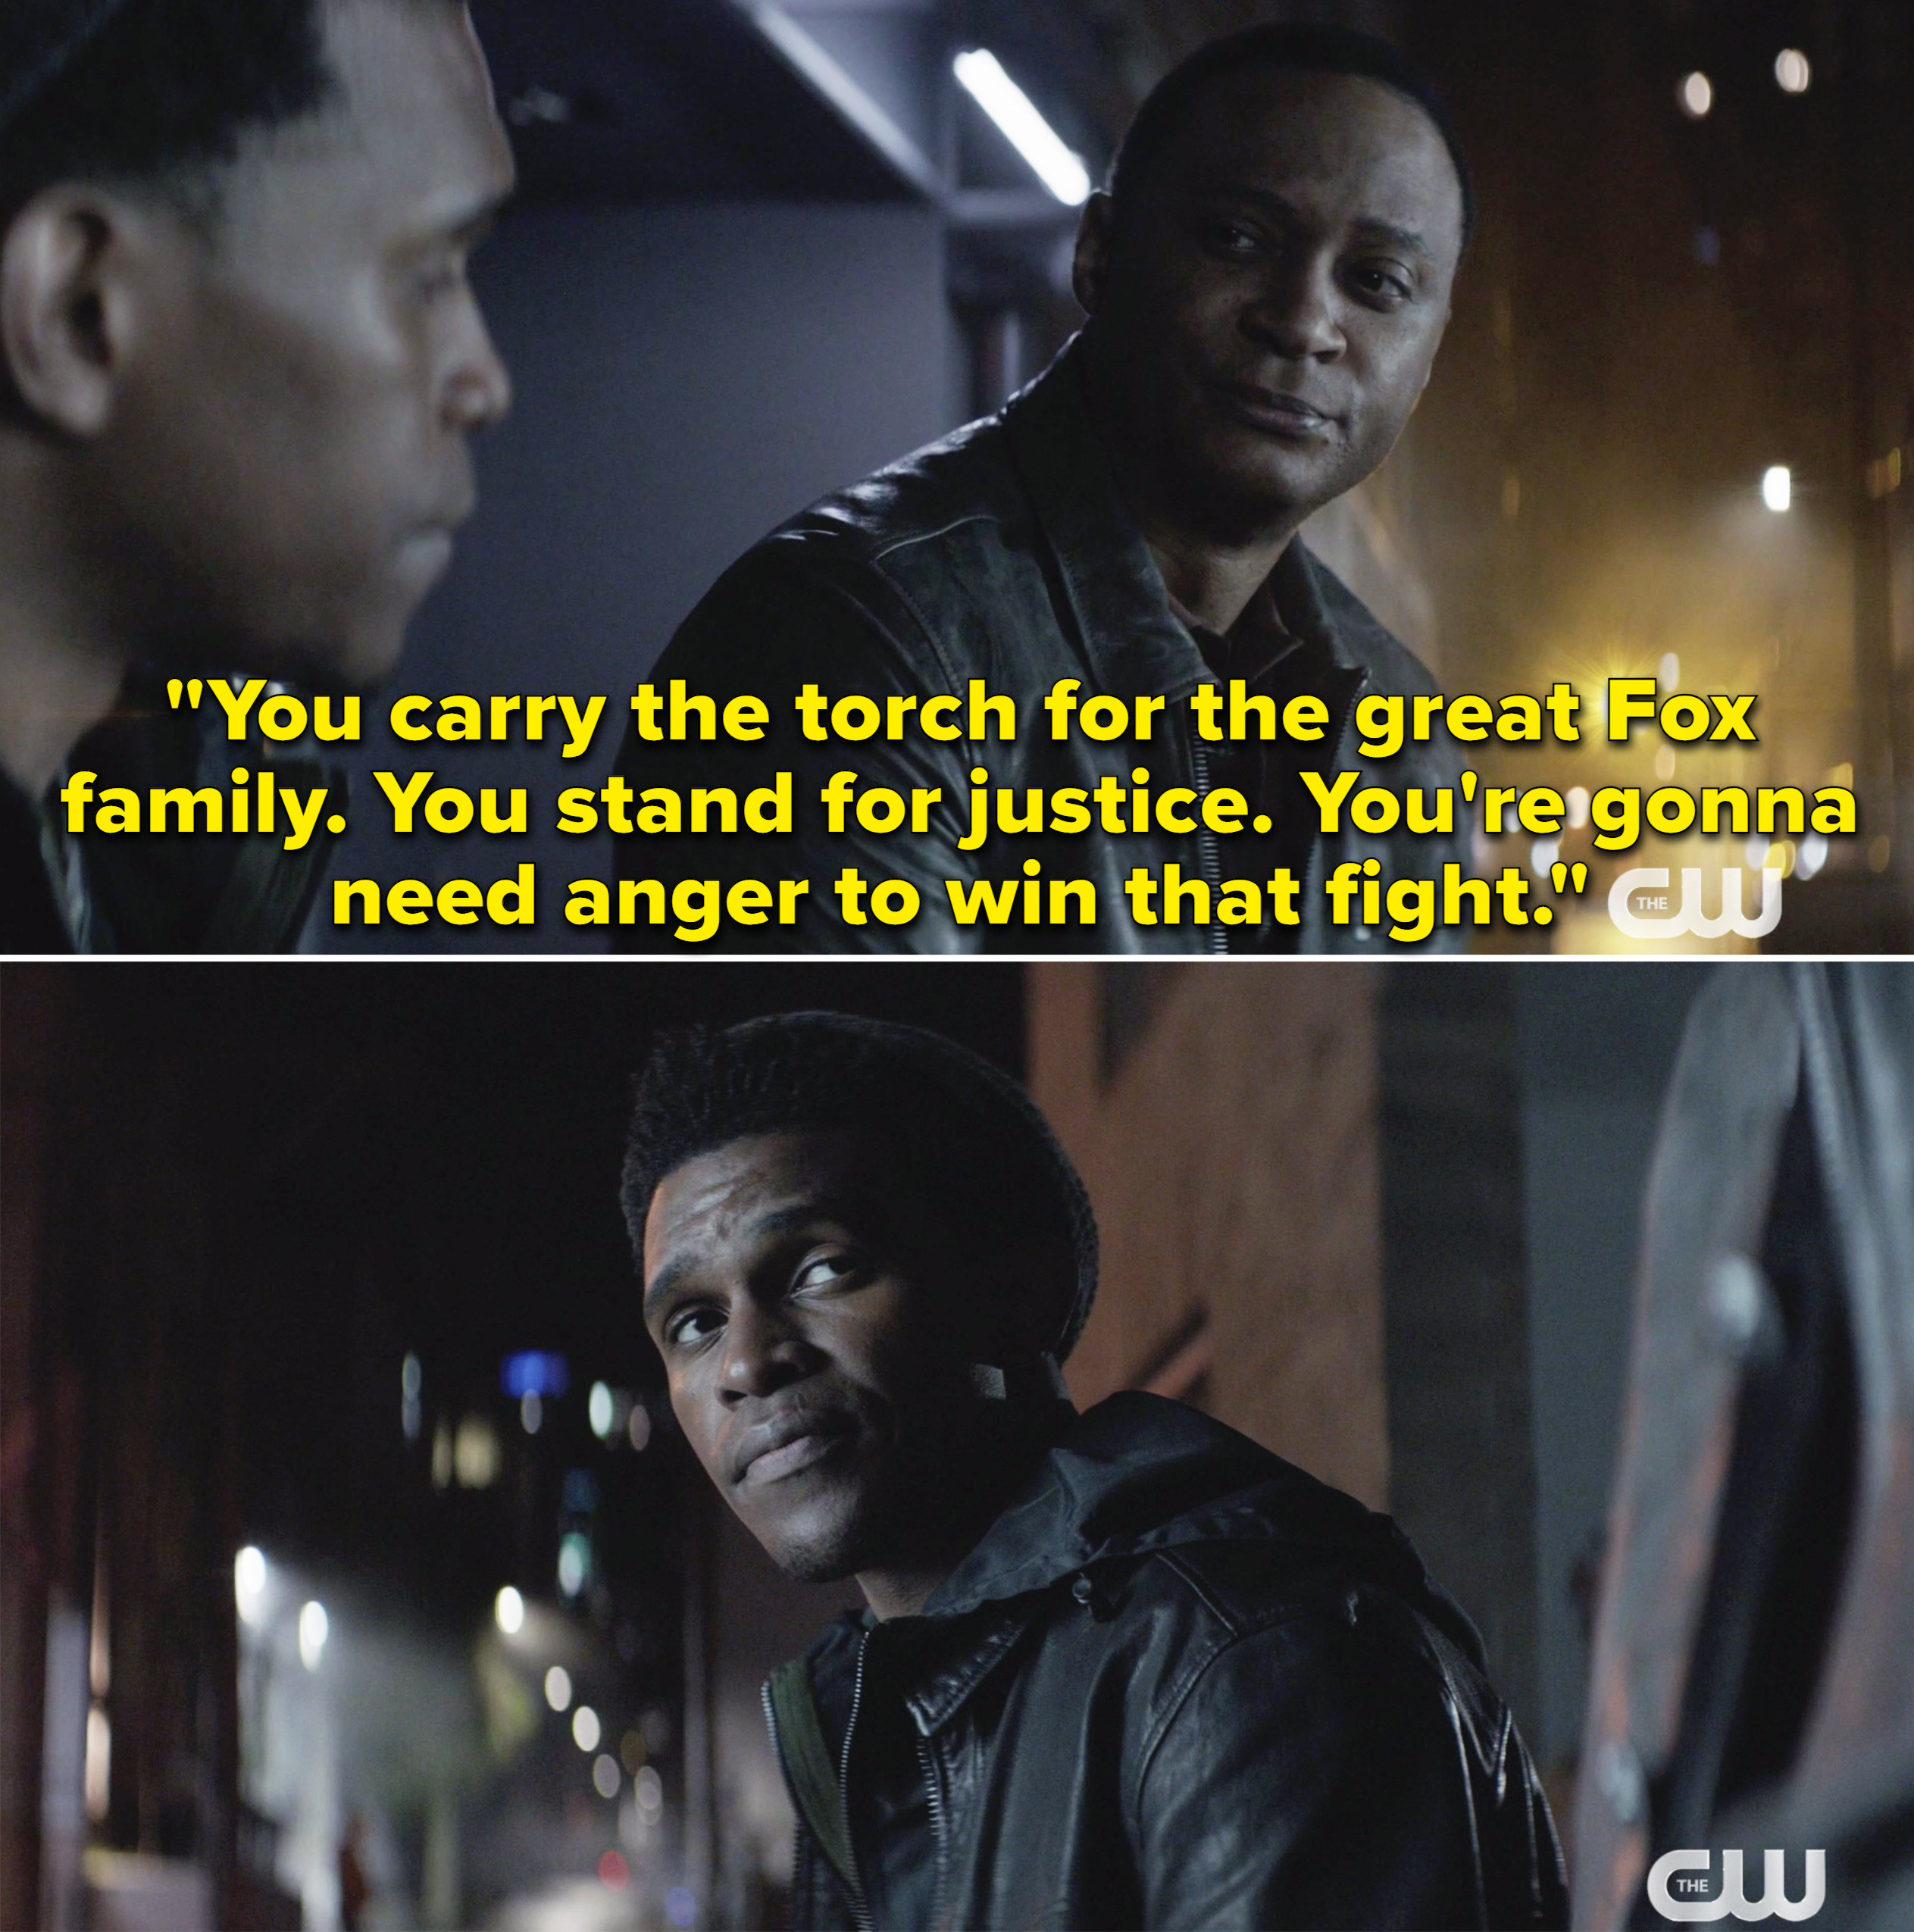 Diggle telling Luke it&#x27;s his job to carry on the Fox name and his anger will &quot;win that fight&quot; for justice